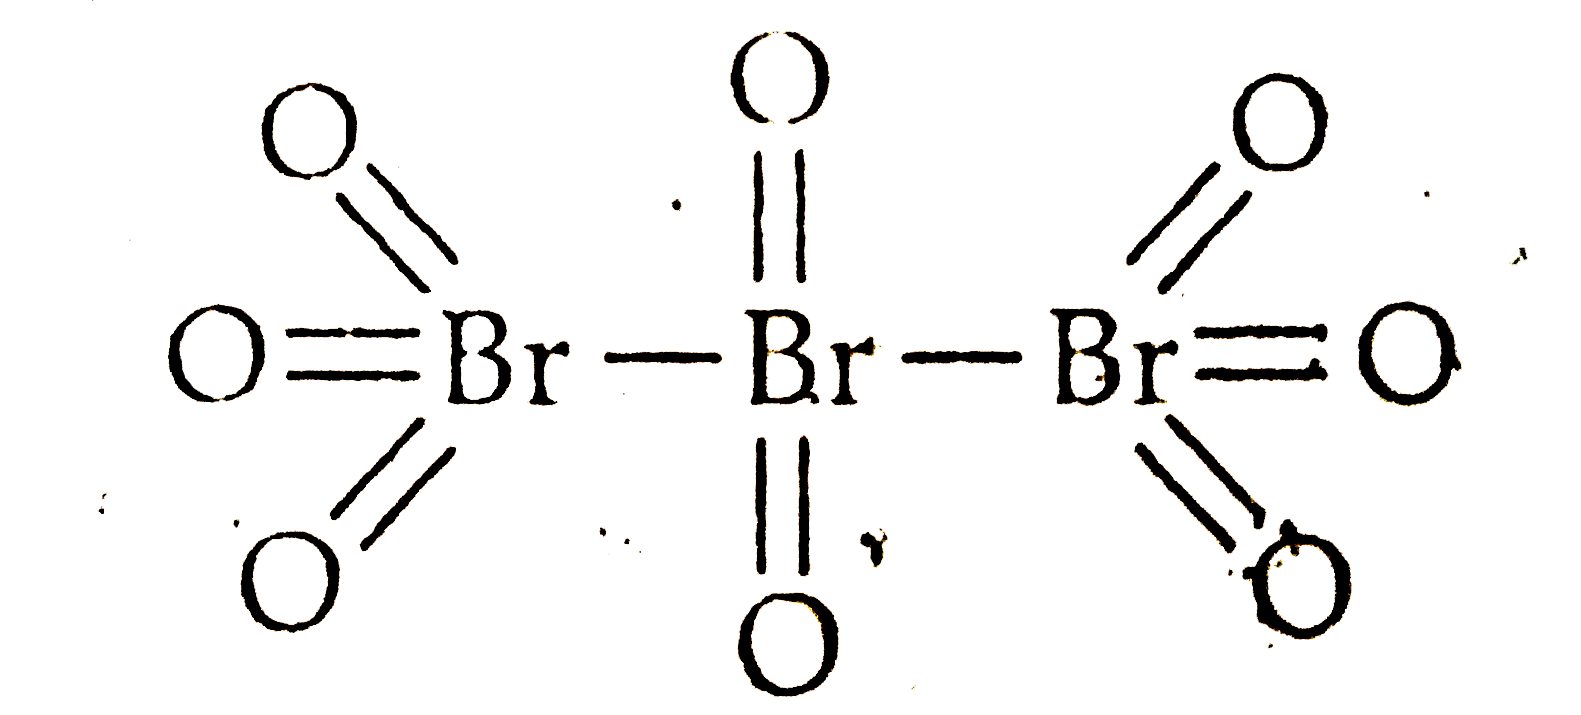 Oxidation number of bromine in sequence in Br(3)O(8) is